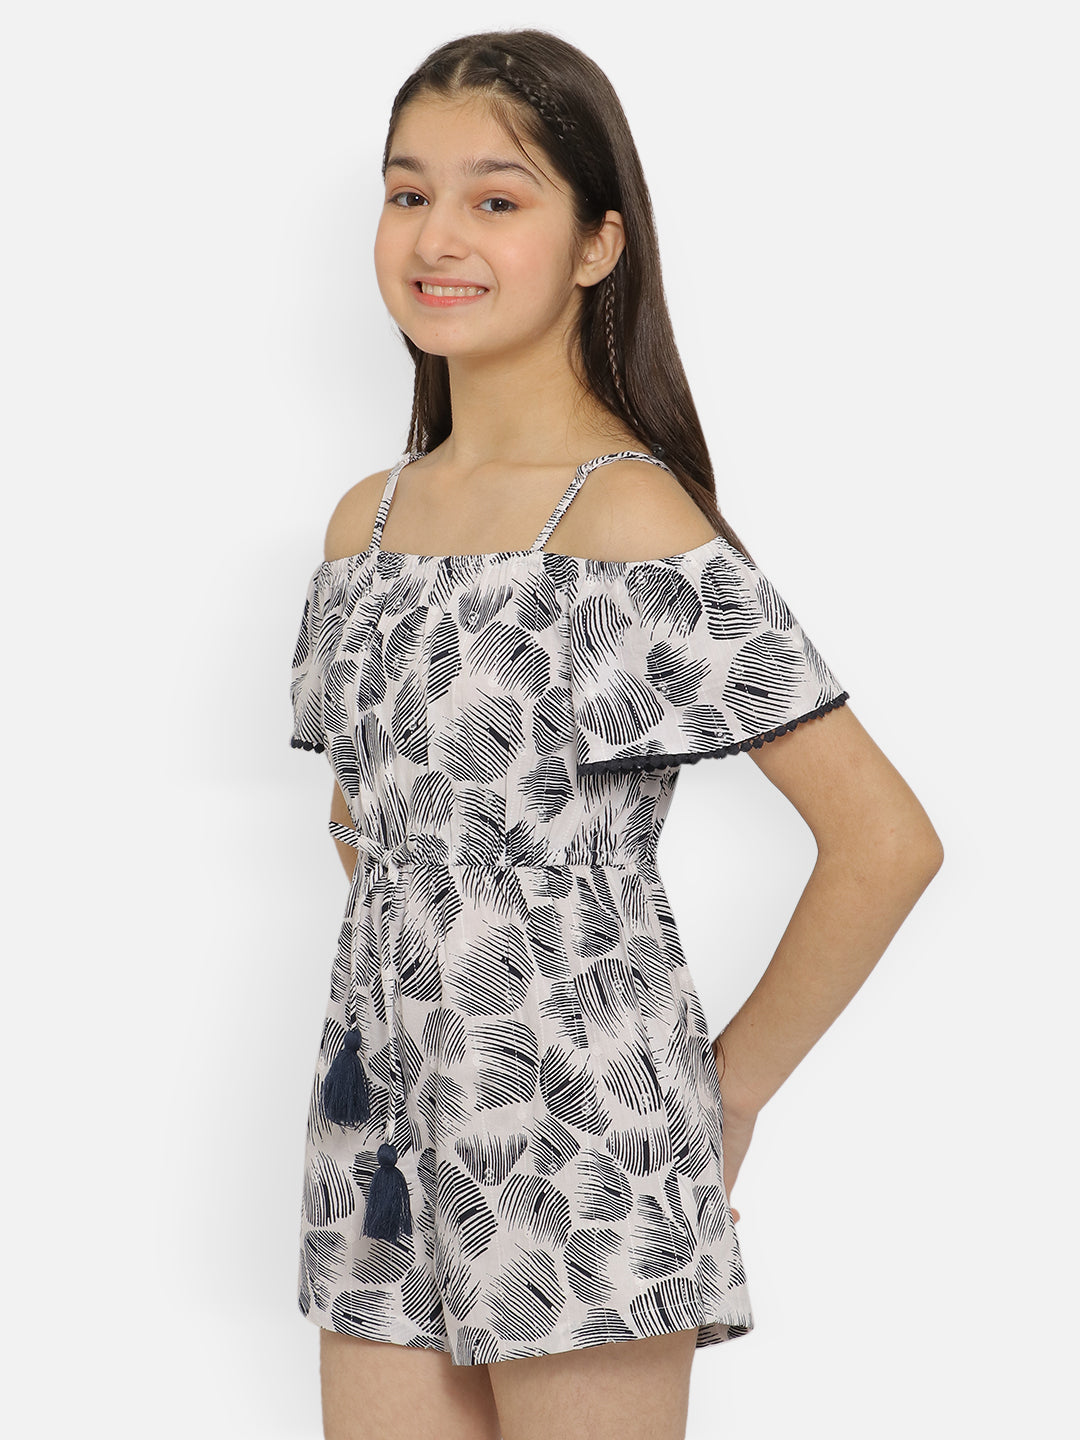 Natilene Girls Abstract Printed Off-Shoulder Cotton Playsuit With Waist Tie-Ups